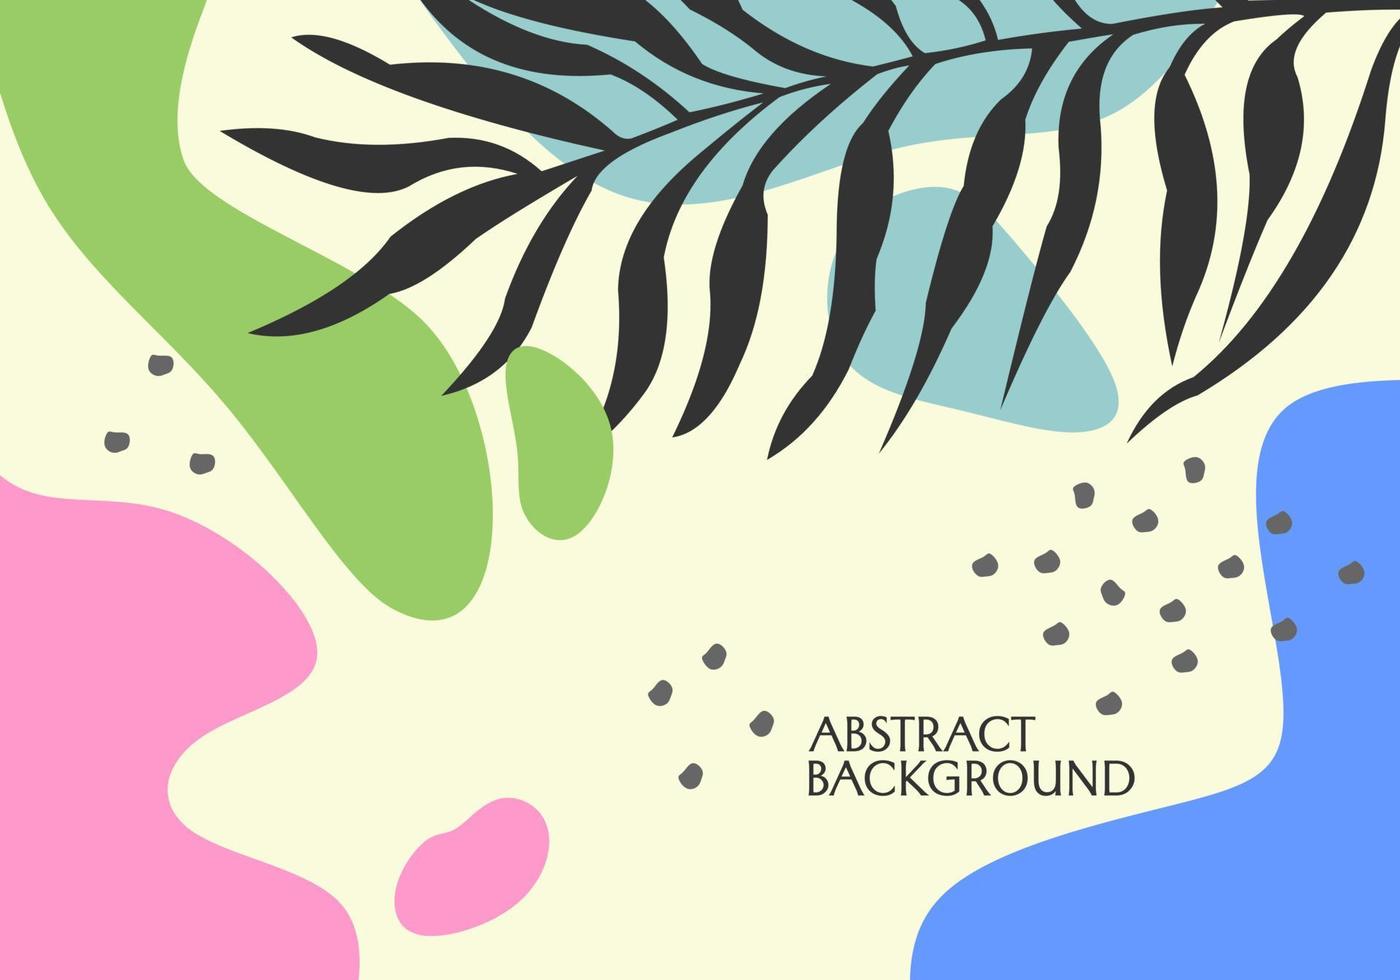 white natural aesthetic theme background vector design. design with leaf elements and abstract shapes